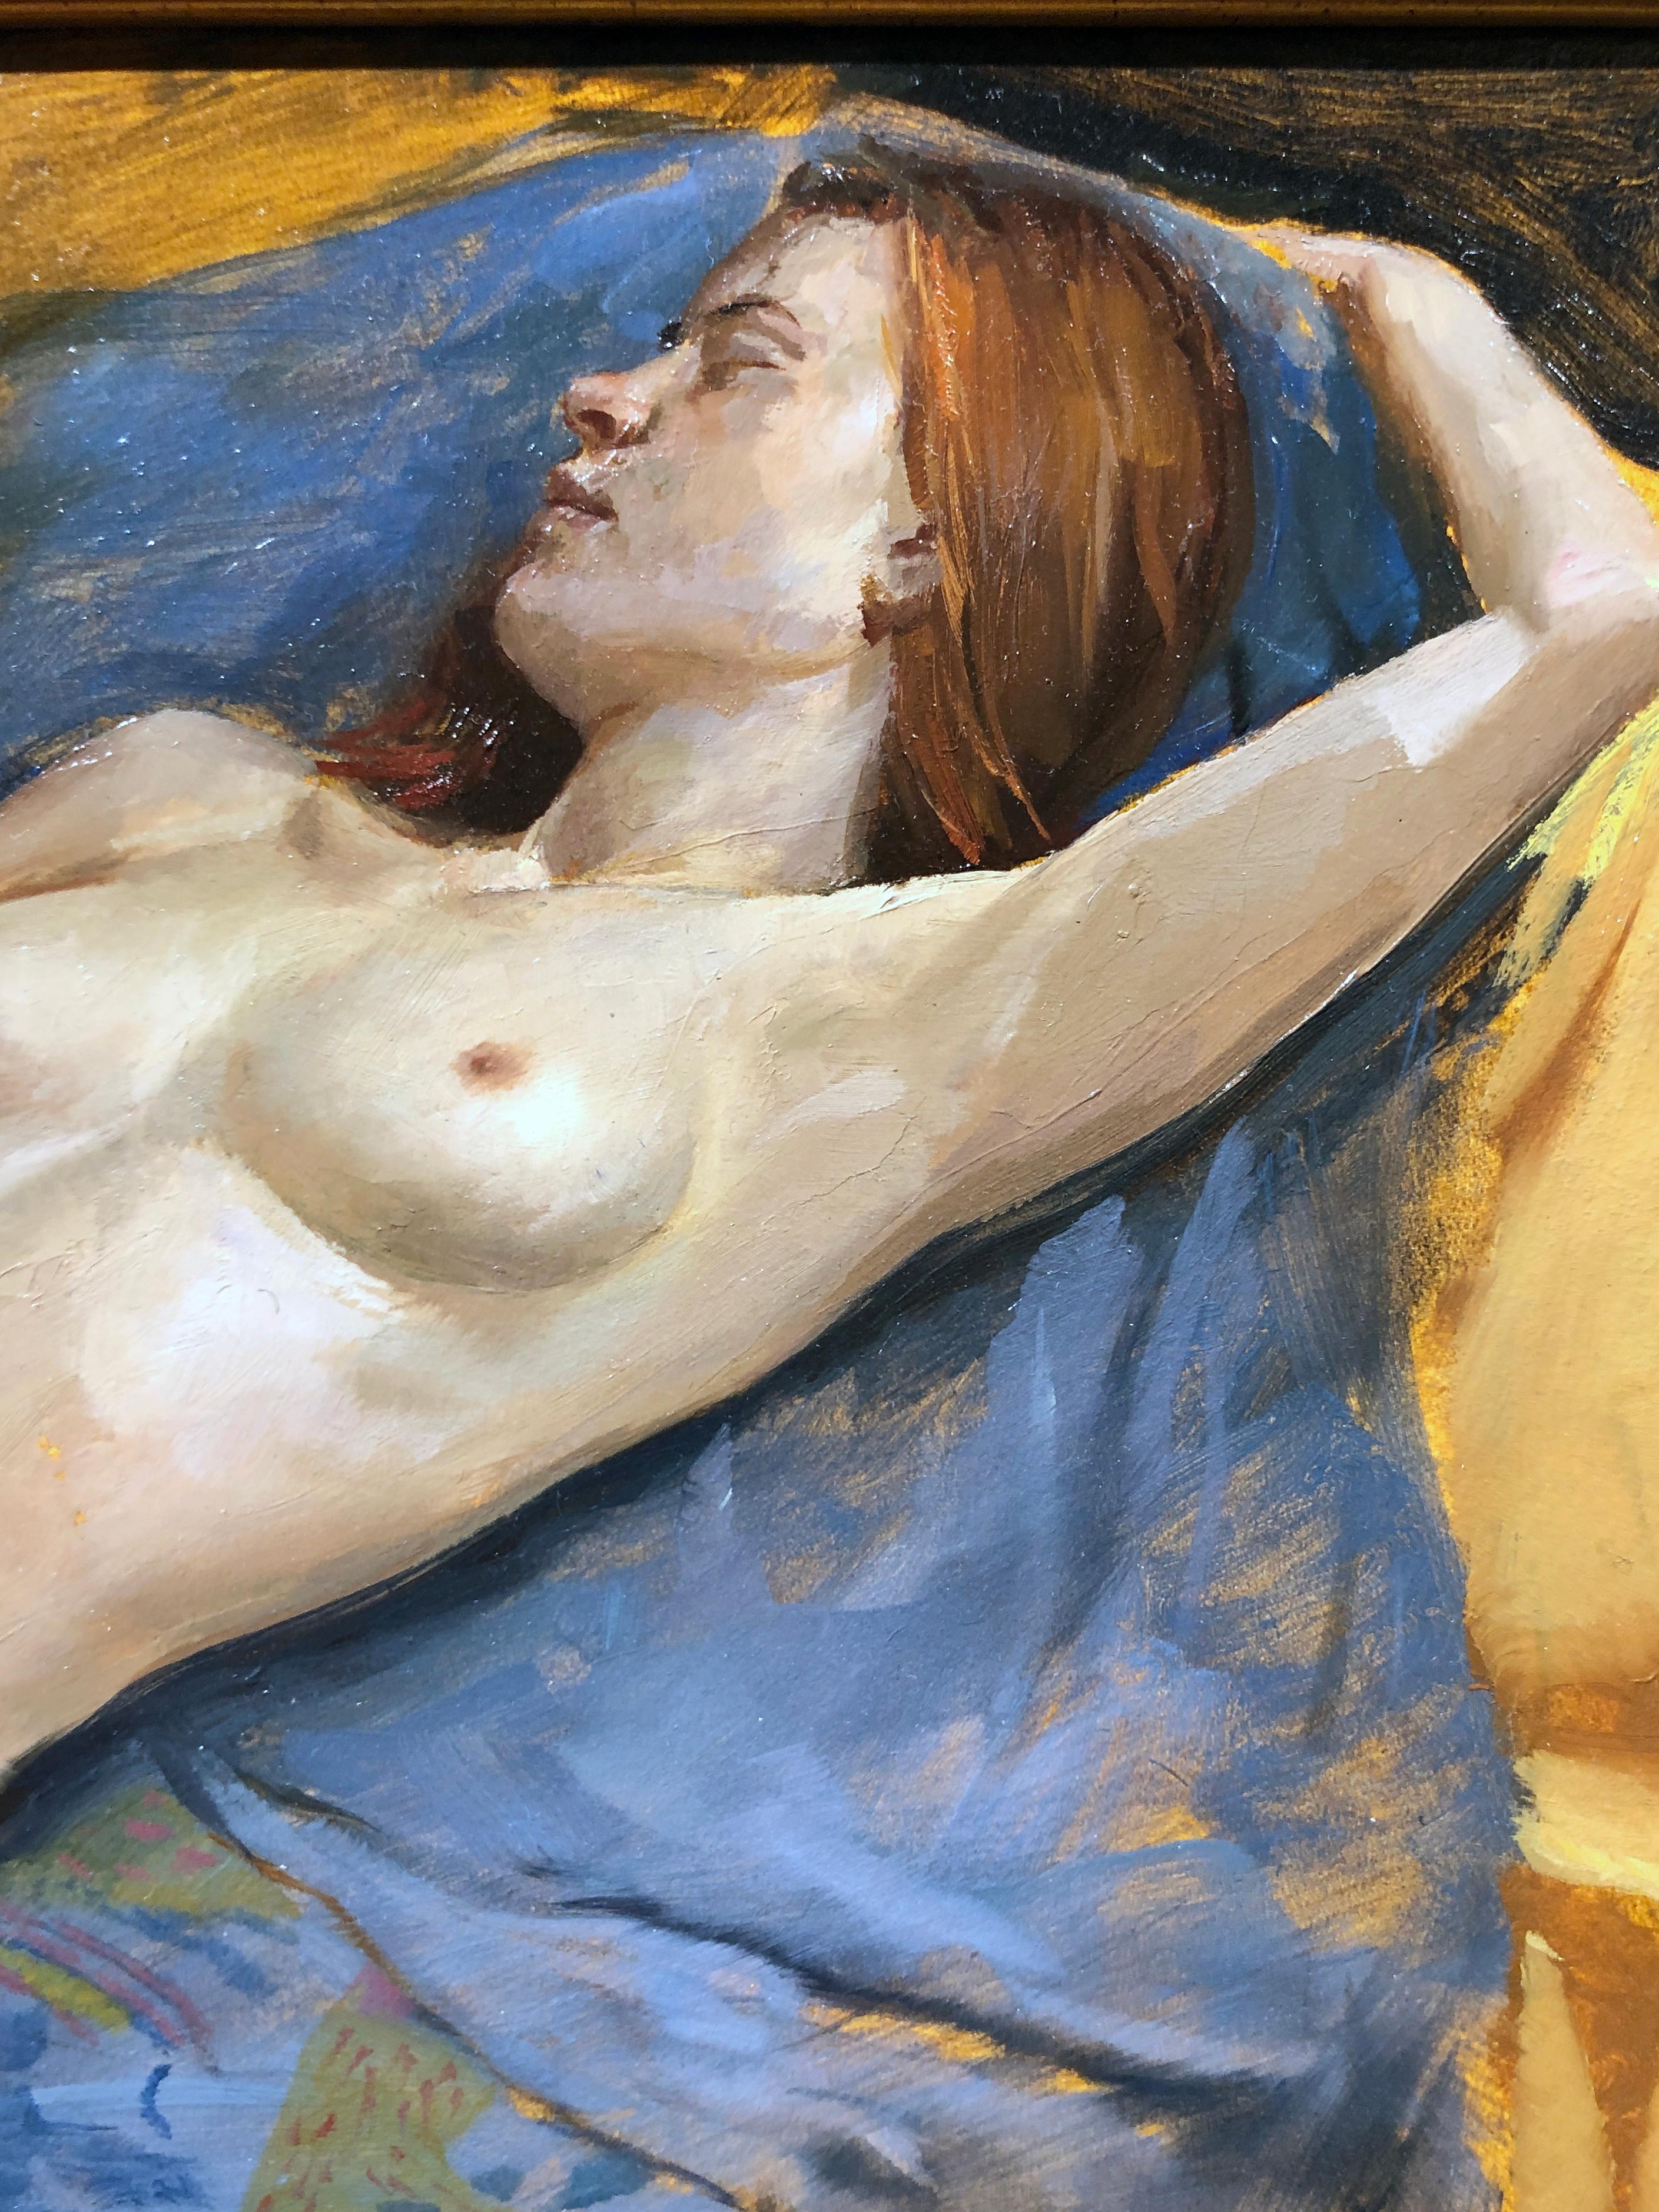 This classically painted nude model study demonstrates the artists understanding of the human figure.  Surrounded by loosely painted lush fabrics, the model lies in a reclining position, her eyes closed, wearing only a pair of slippers.  The quick,